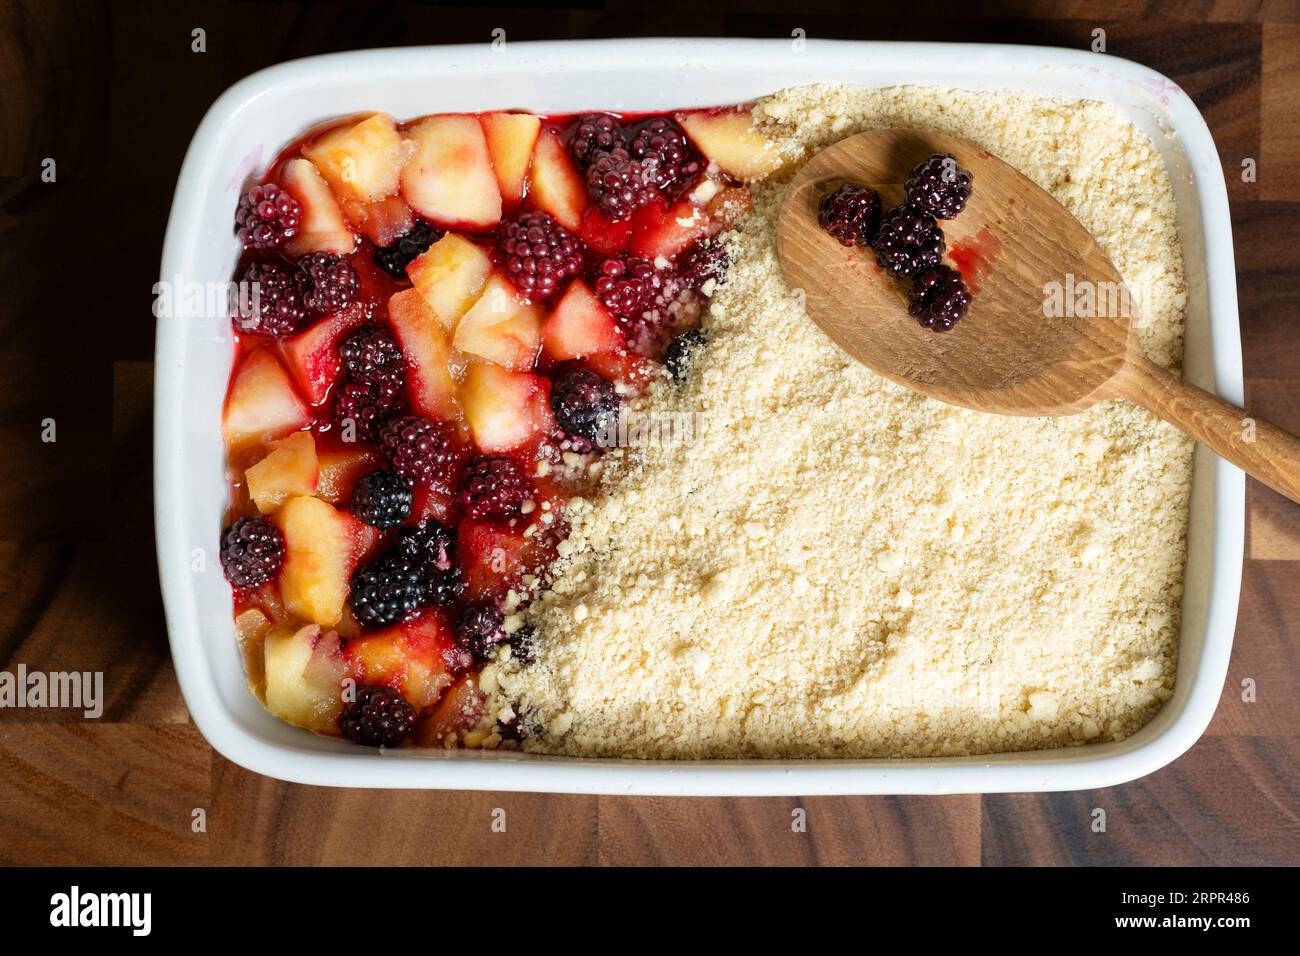 A homemade traditional english apple and blackberry crumble. The pie made with locally foraged wild fruit and is in a large ceramic baking dish Stock Photo